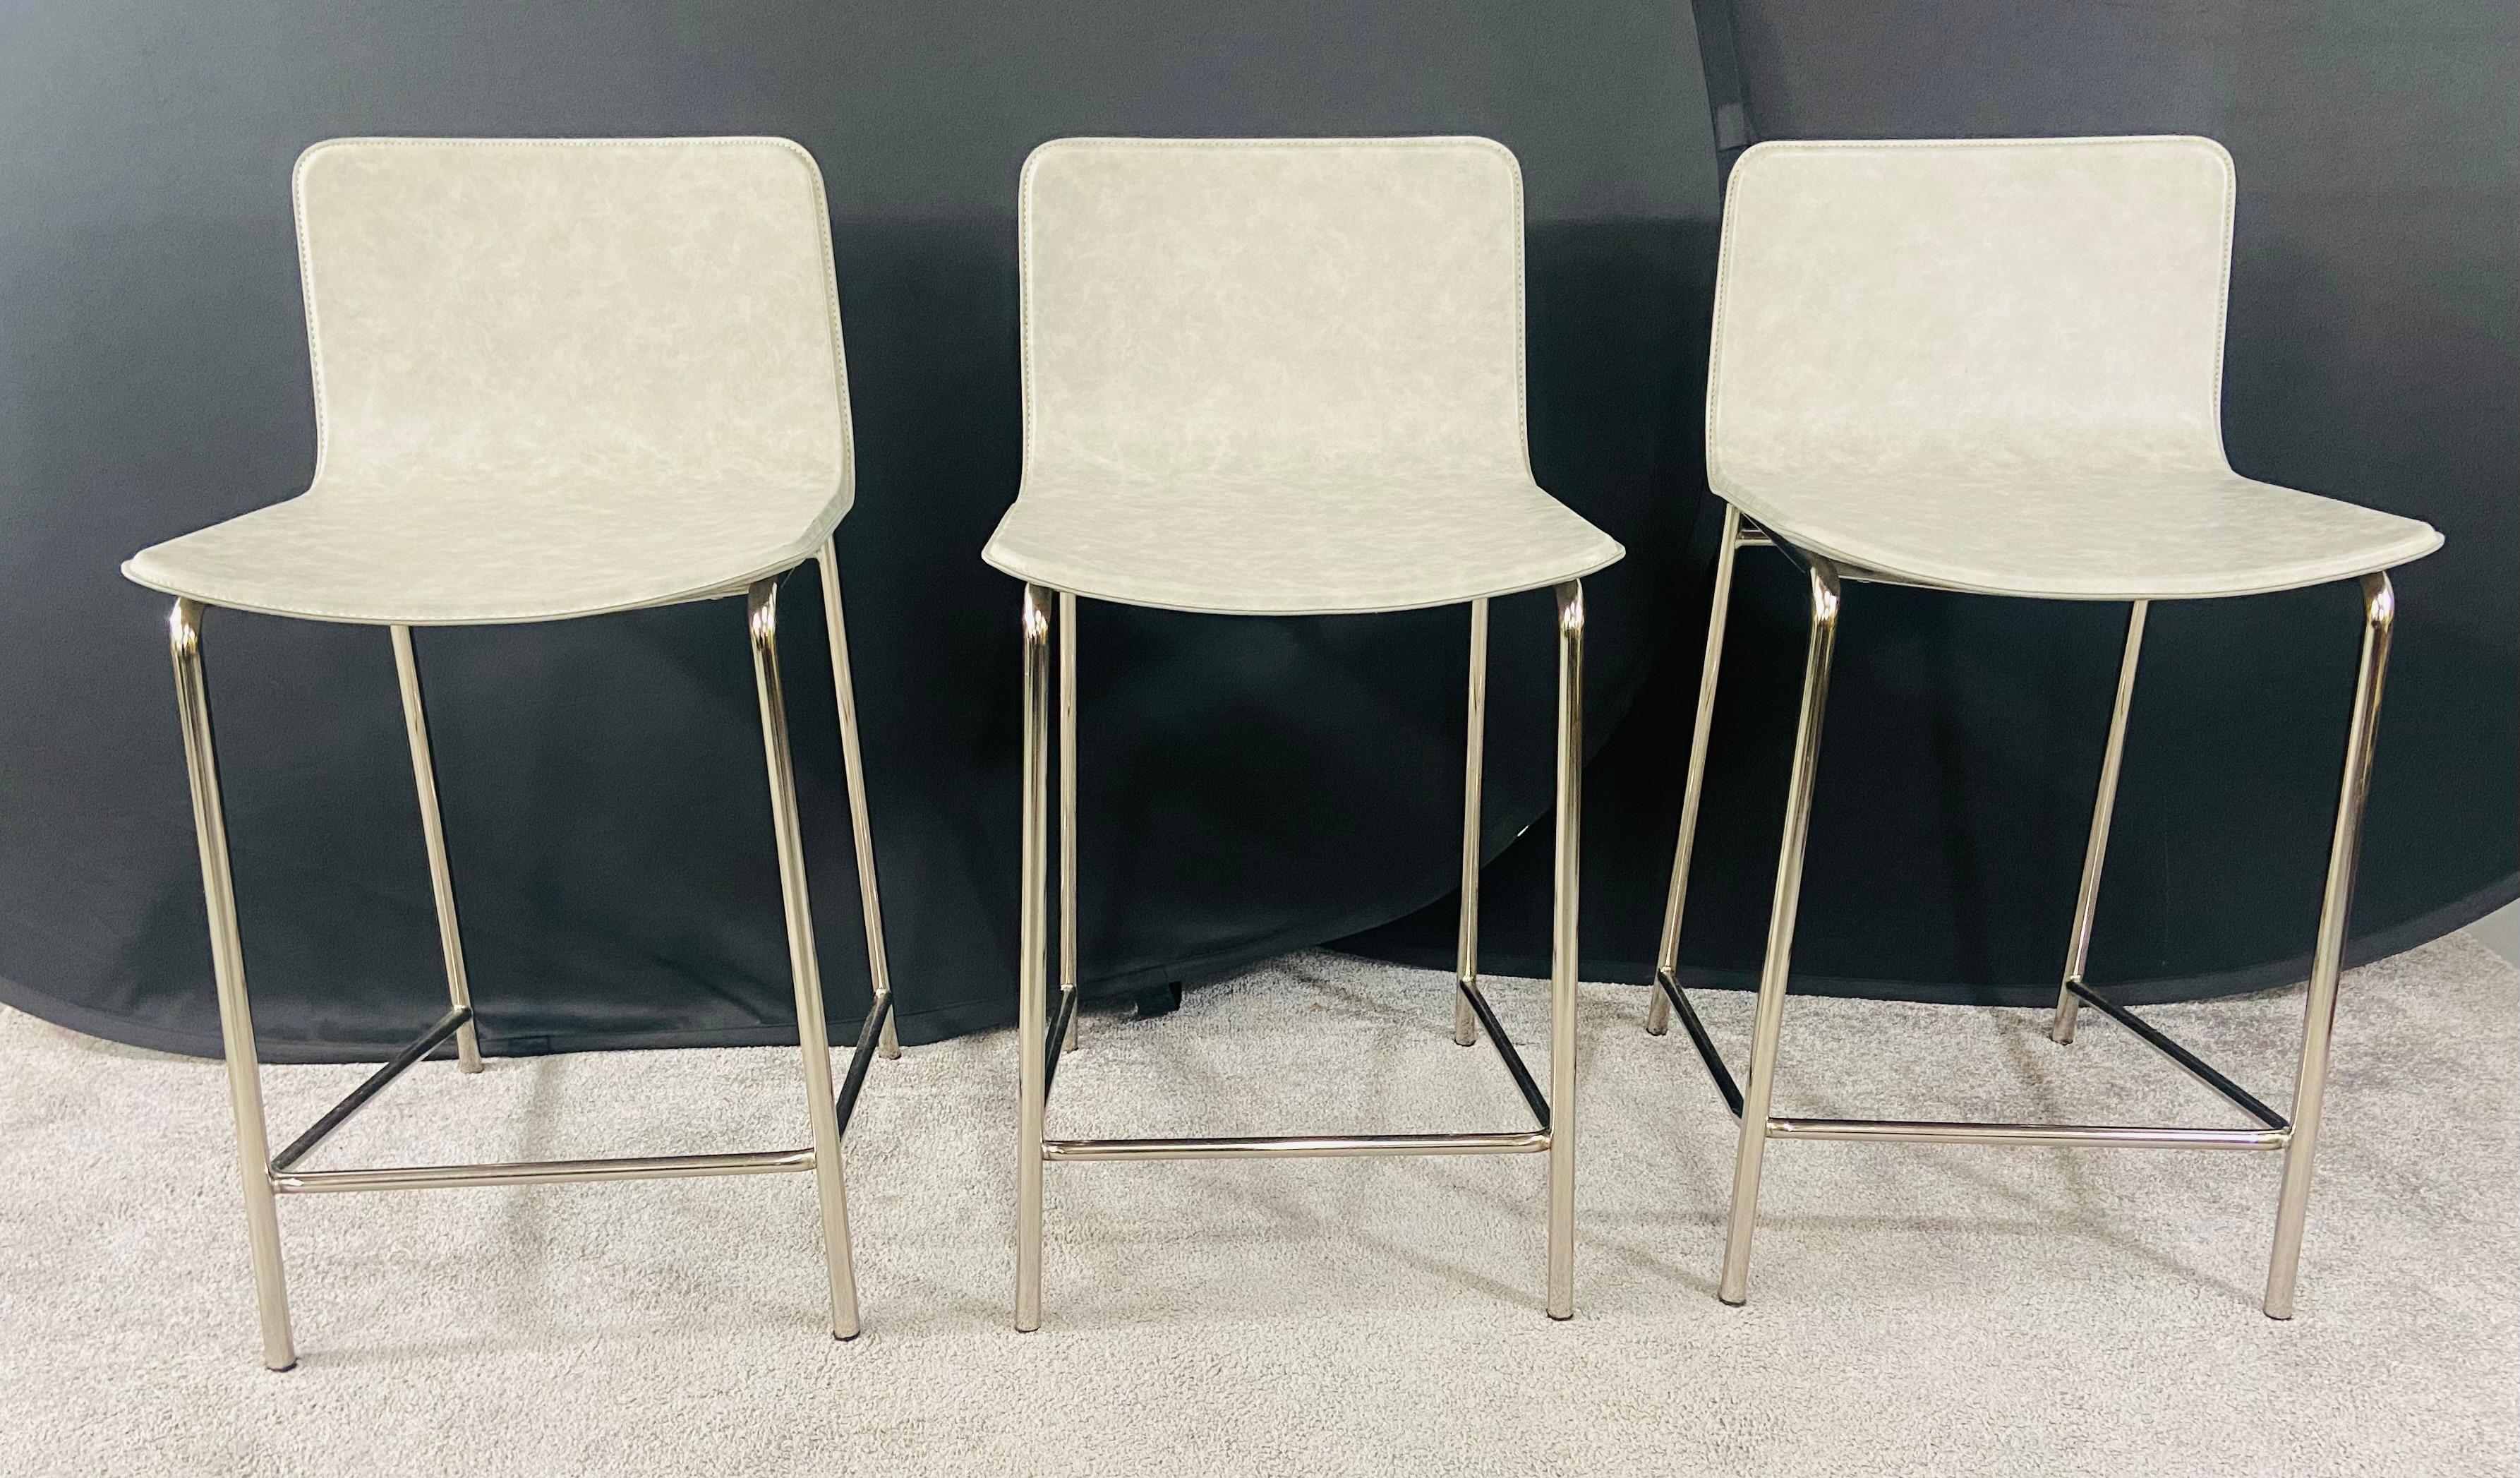 A set of three modern quality bar or kitchen stools. The stools seats are made of leather in a Grey neutral color and are well stitched. The frame of the stools is made in stainless steel. Modern, elegant and minimalist, the stools will elevate any